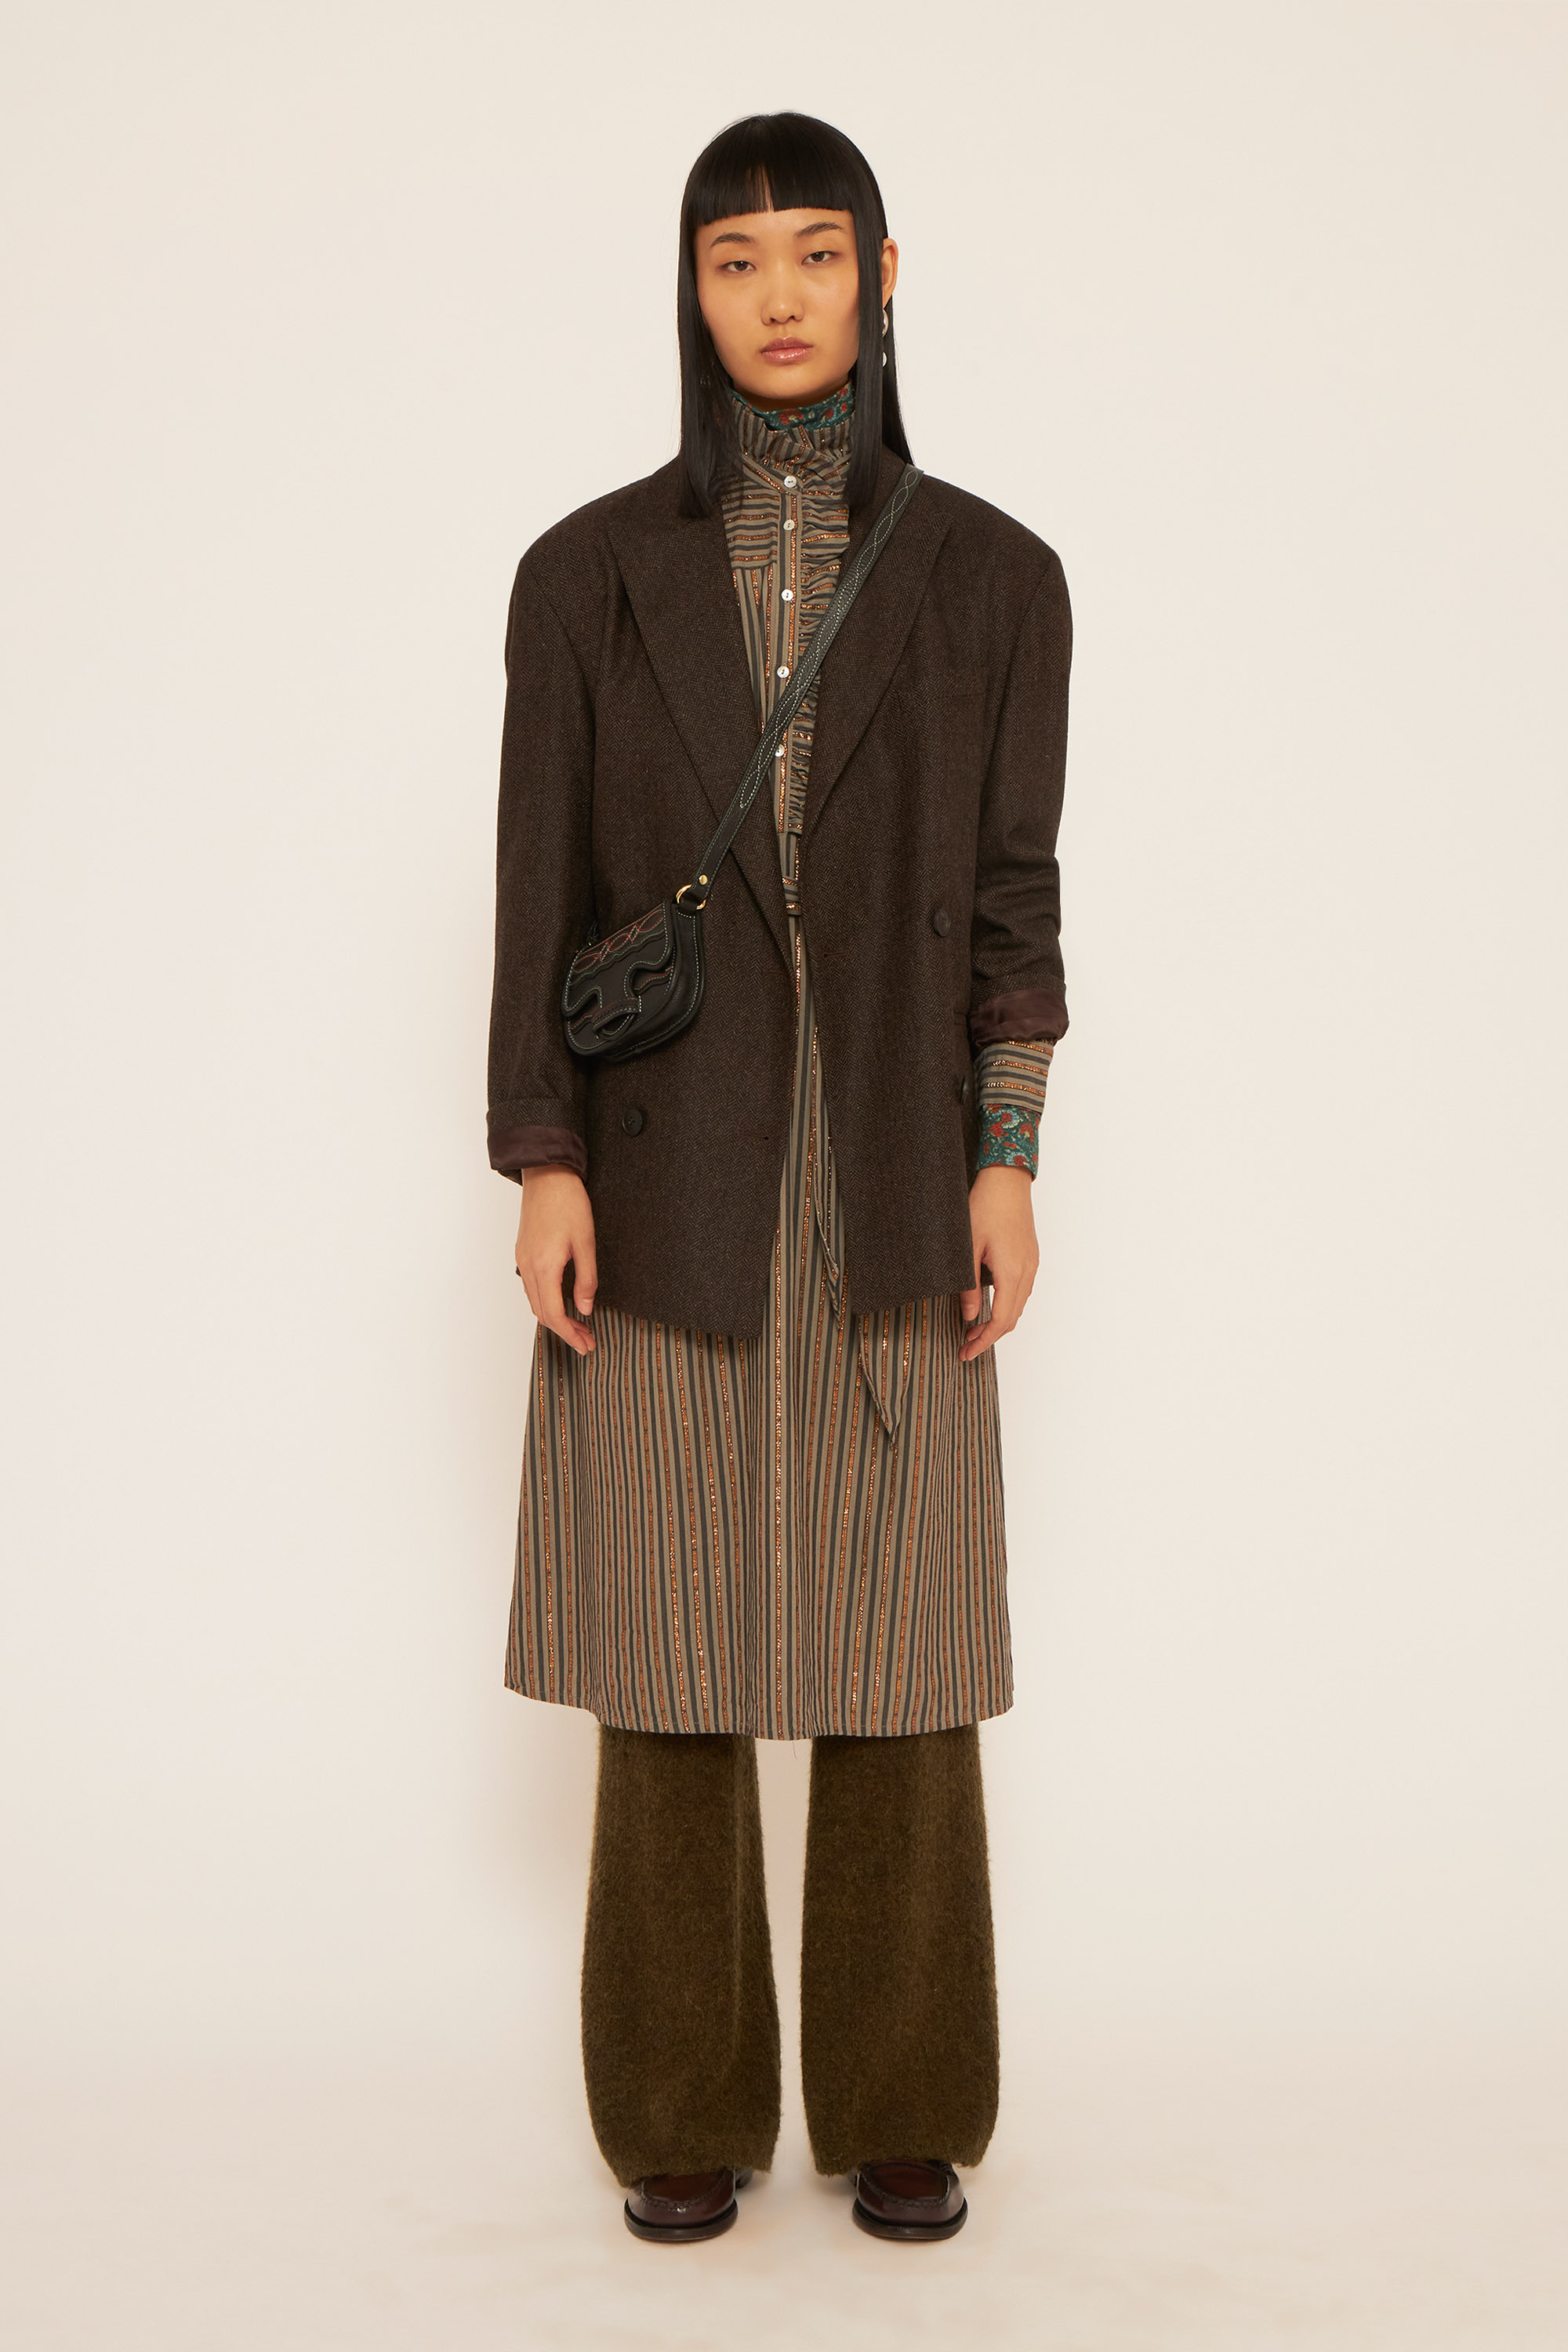 A girl wearing a brown jacket, a kaki dress and a craft brown pants.